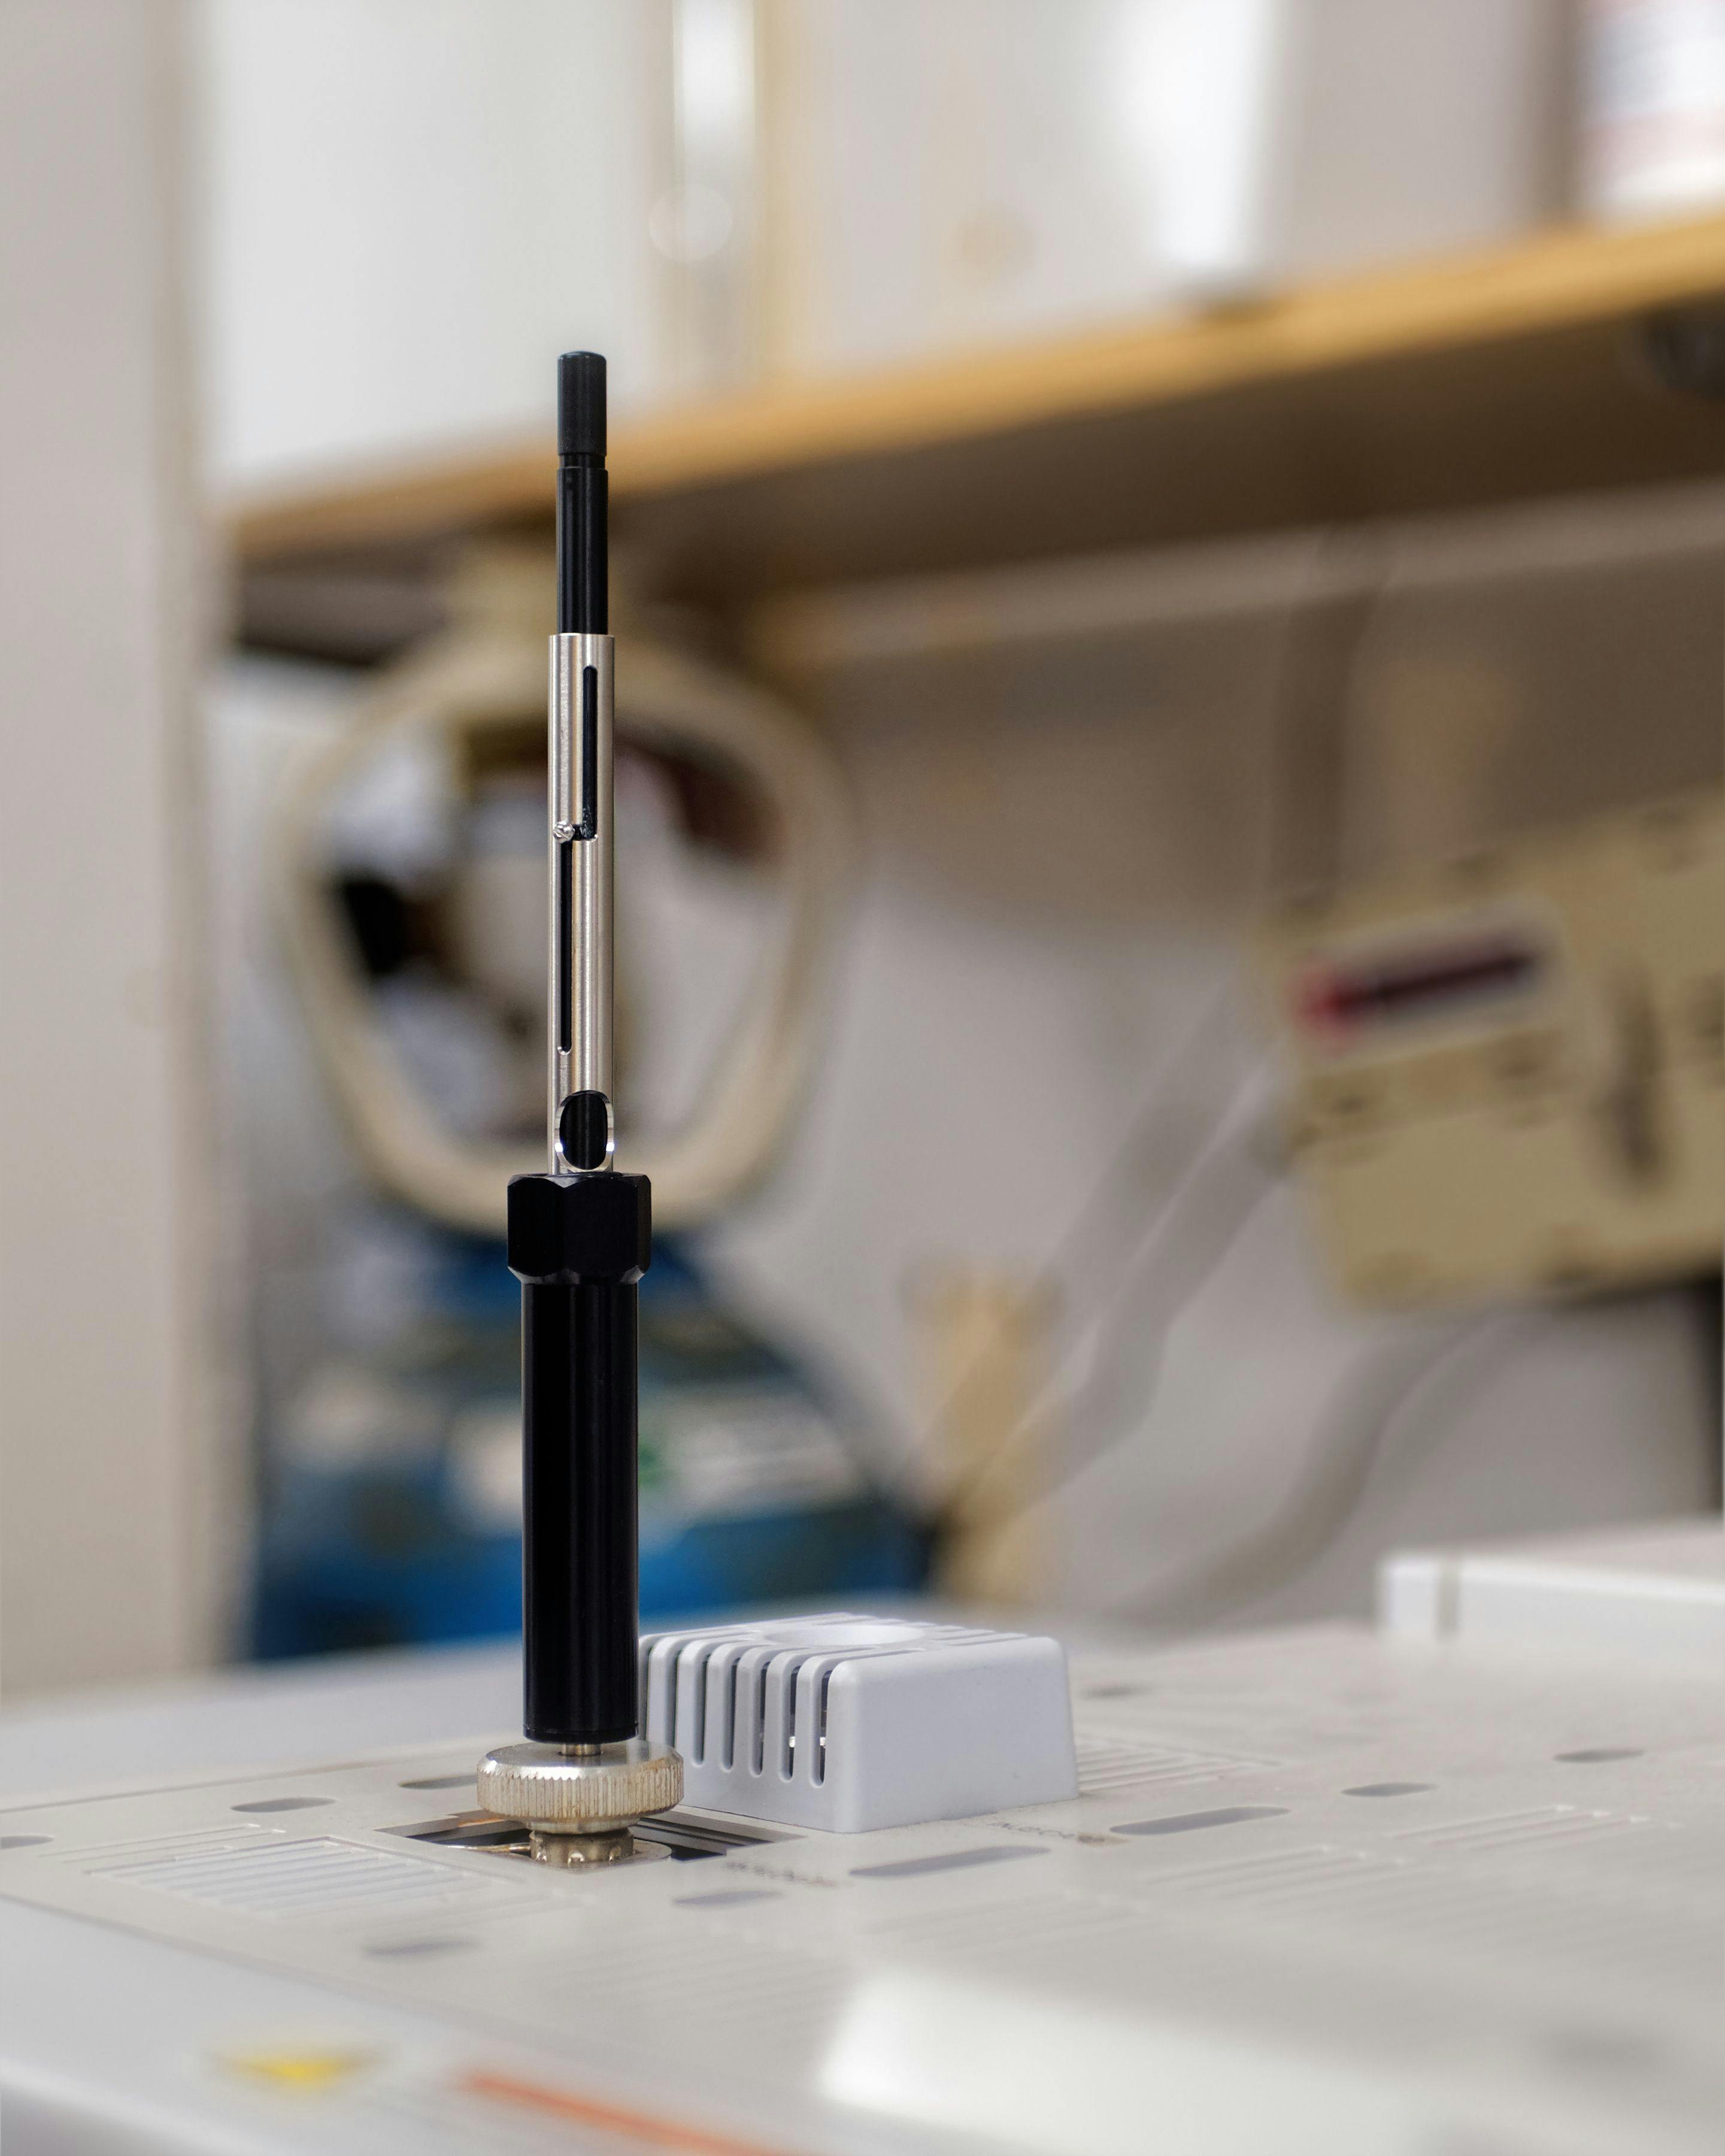 Solid phase microextraction holder used in gas chromatography. | Image Credit: © ggw - stock.adobe.com